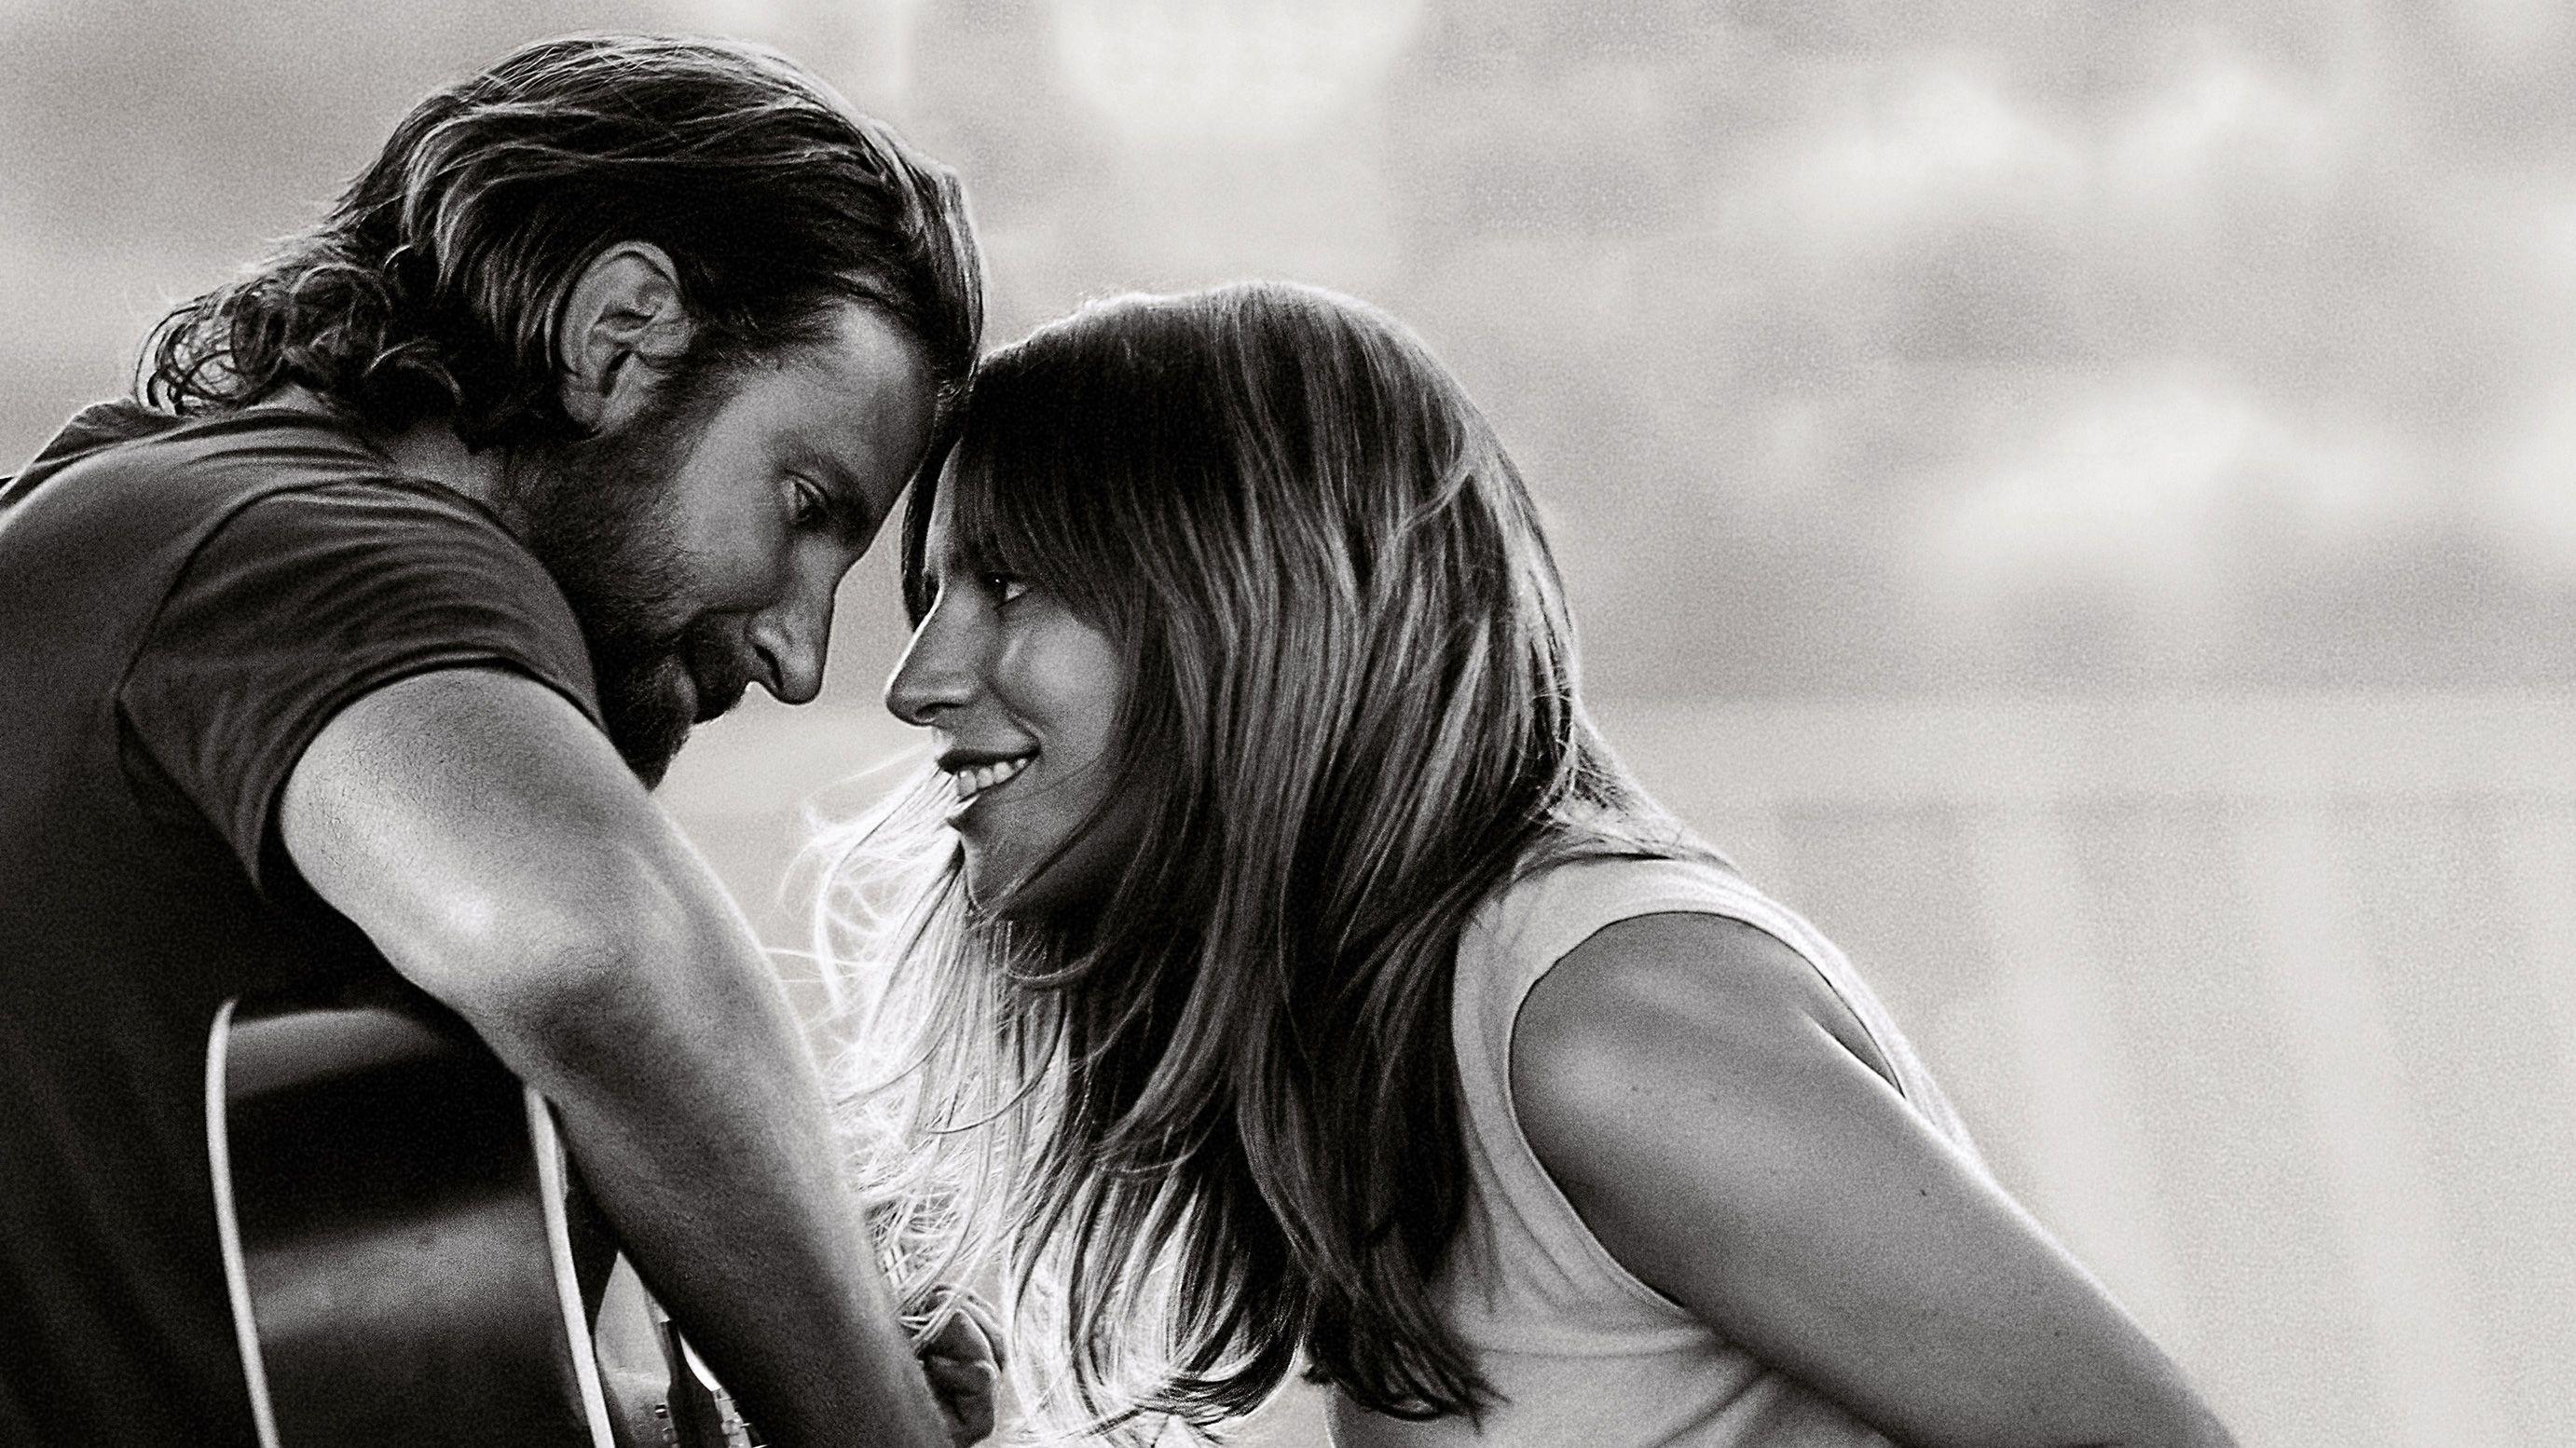 A Star Is Born Movie Poster, HD Movies, 4k Wallpapers, Image